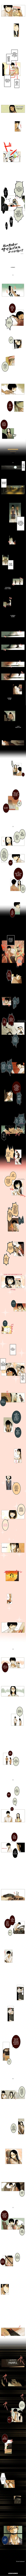 My Student Can't Be a Psychopath Ch. 3 Pink PC